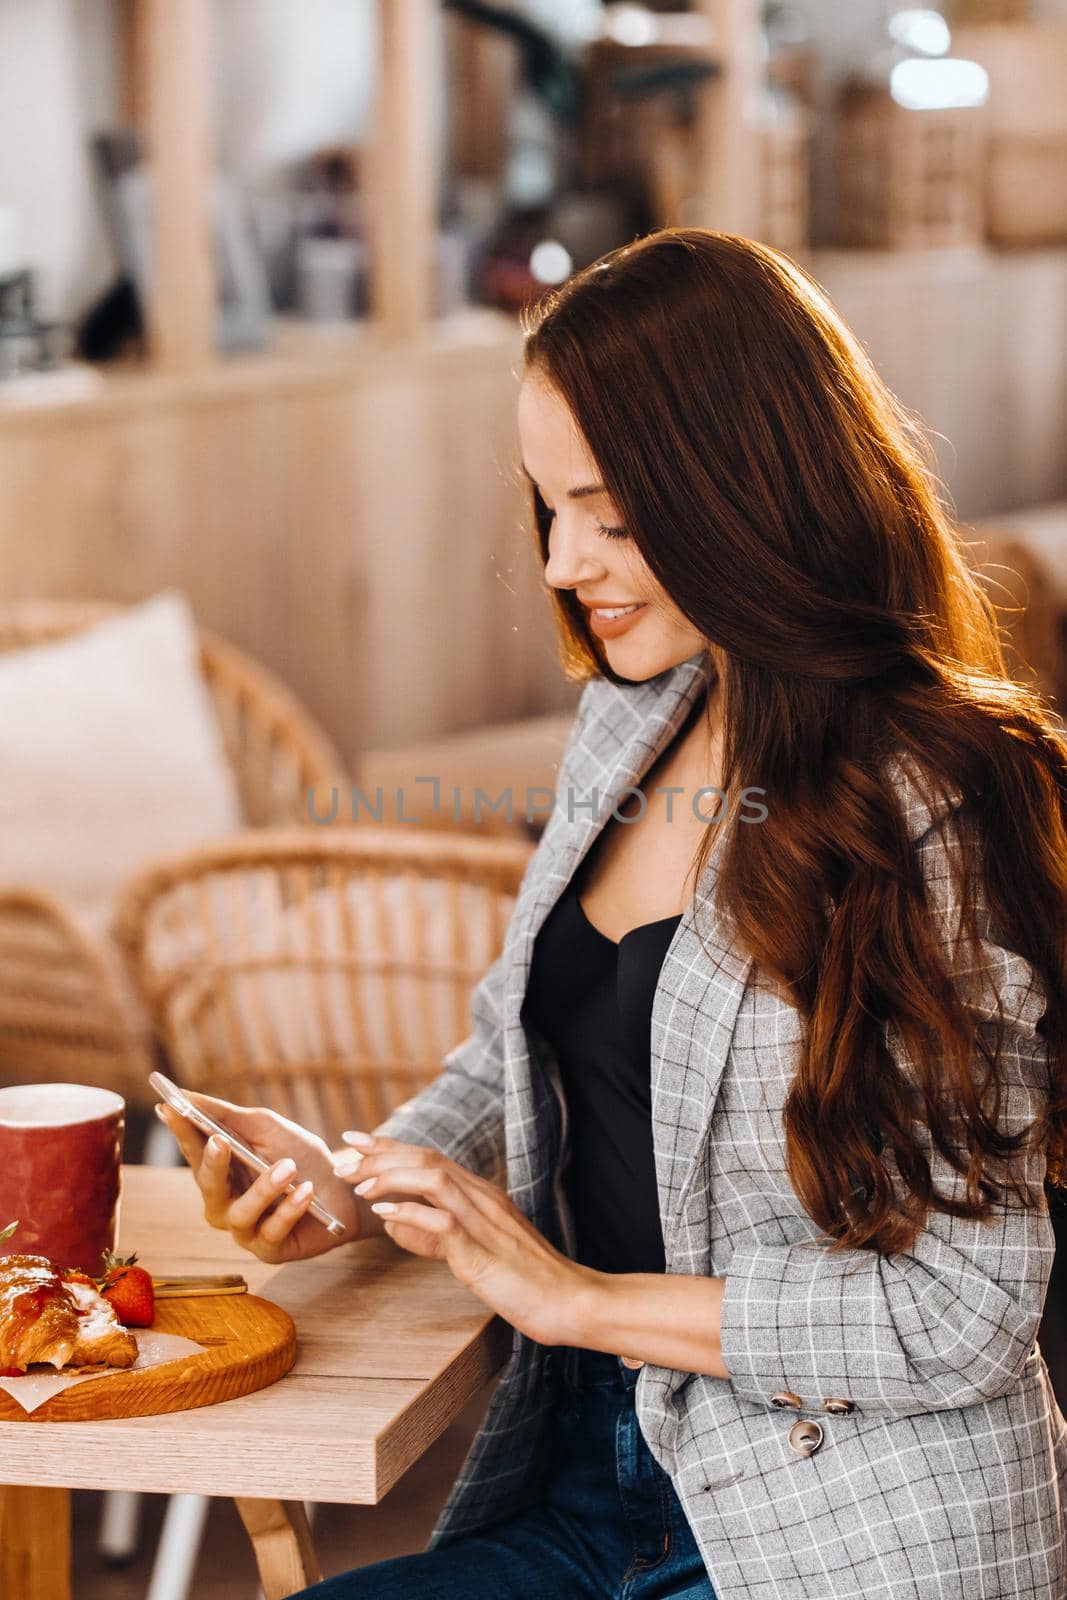 A girl is sitting at a table and texting on her smartphone in a cafe.A girl is sitting in a coffee shop with a phone.Writes in the phone.